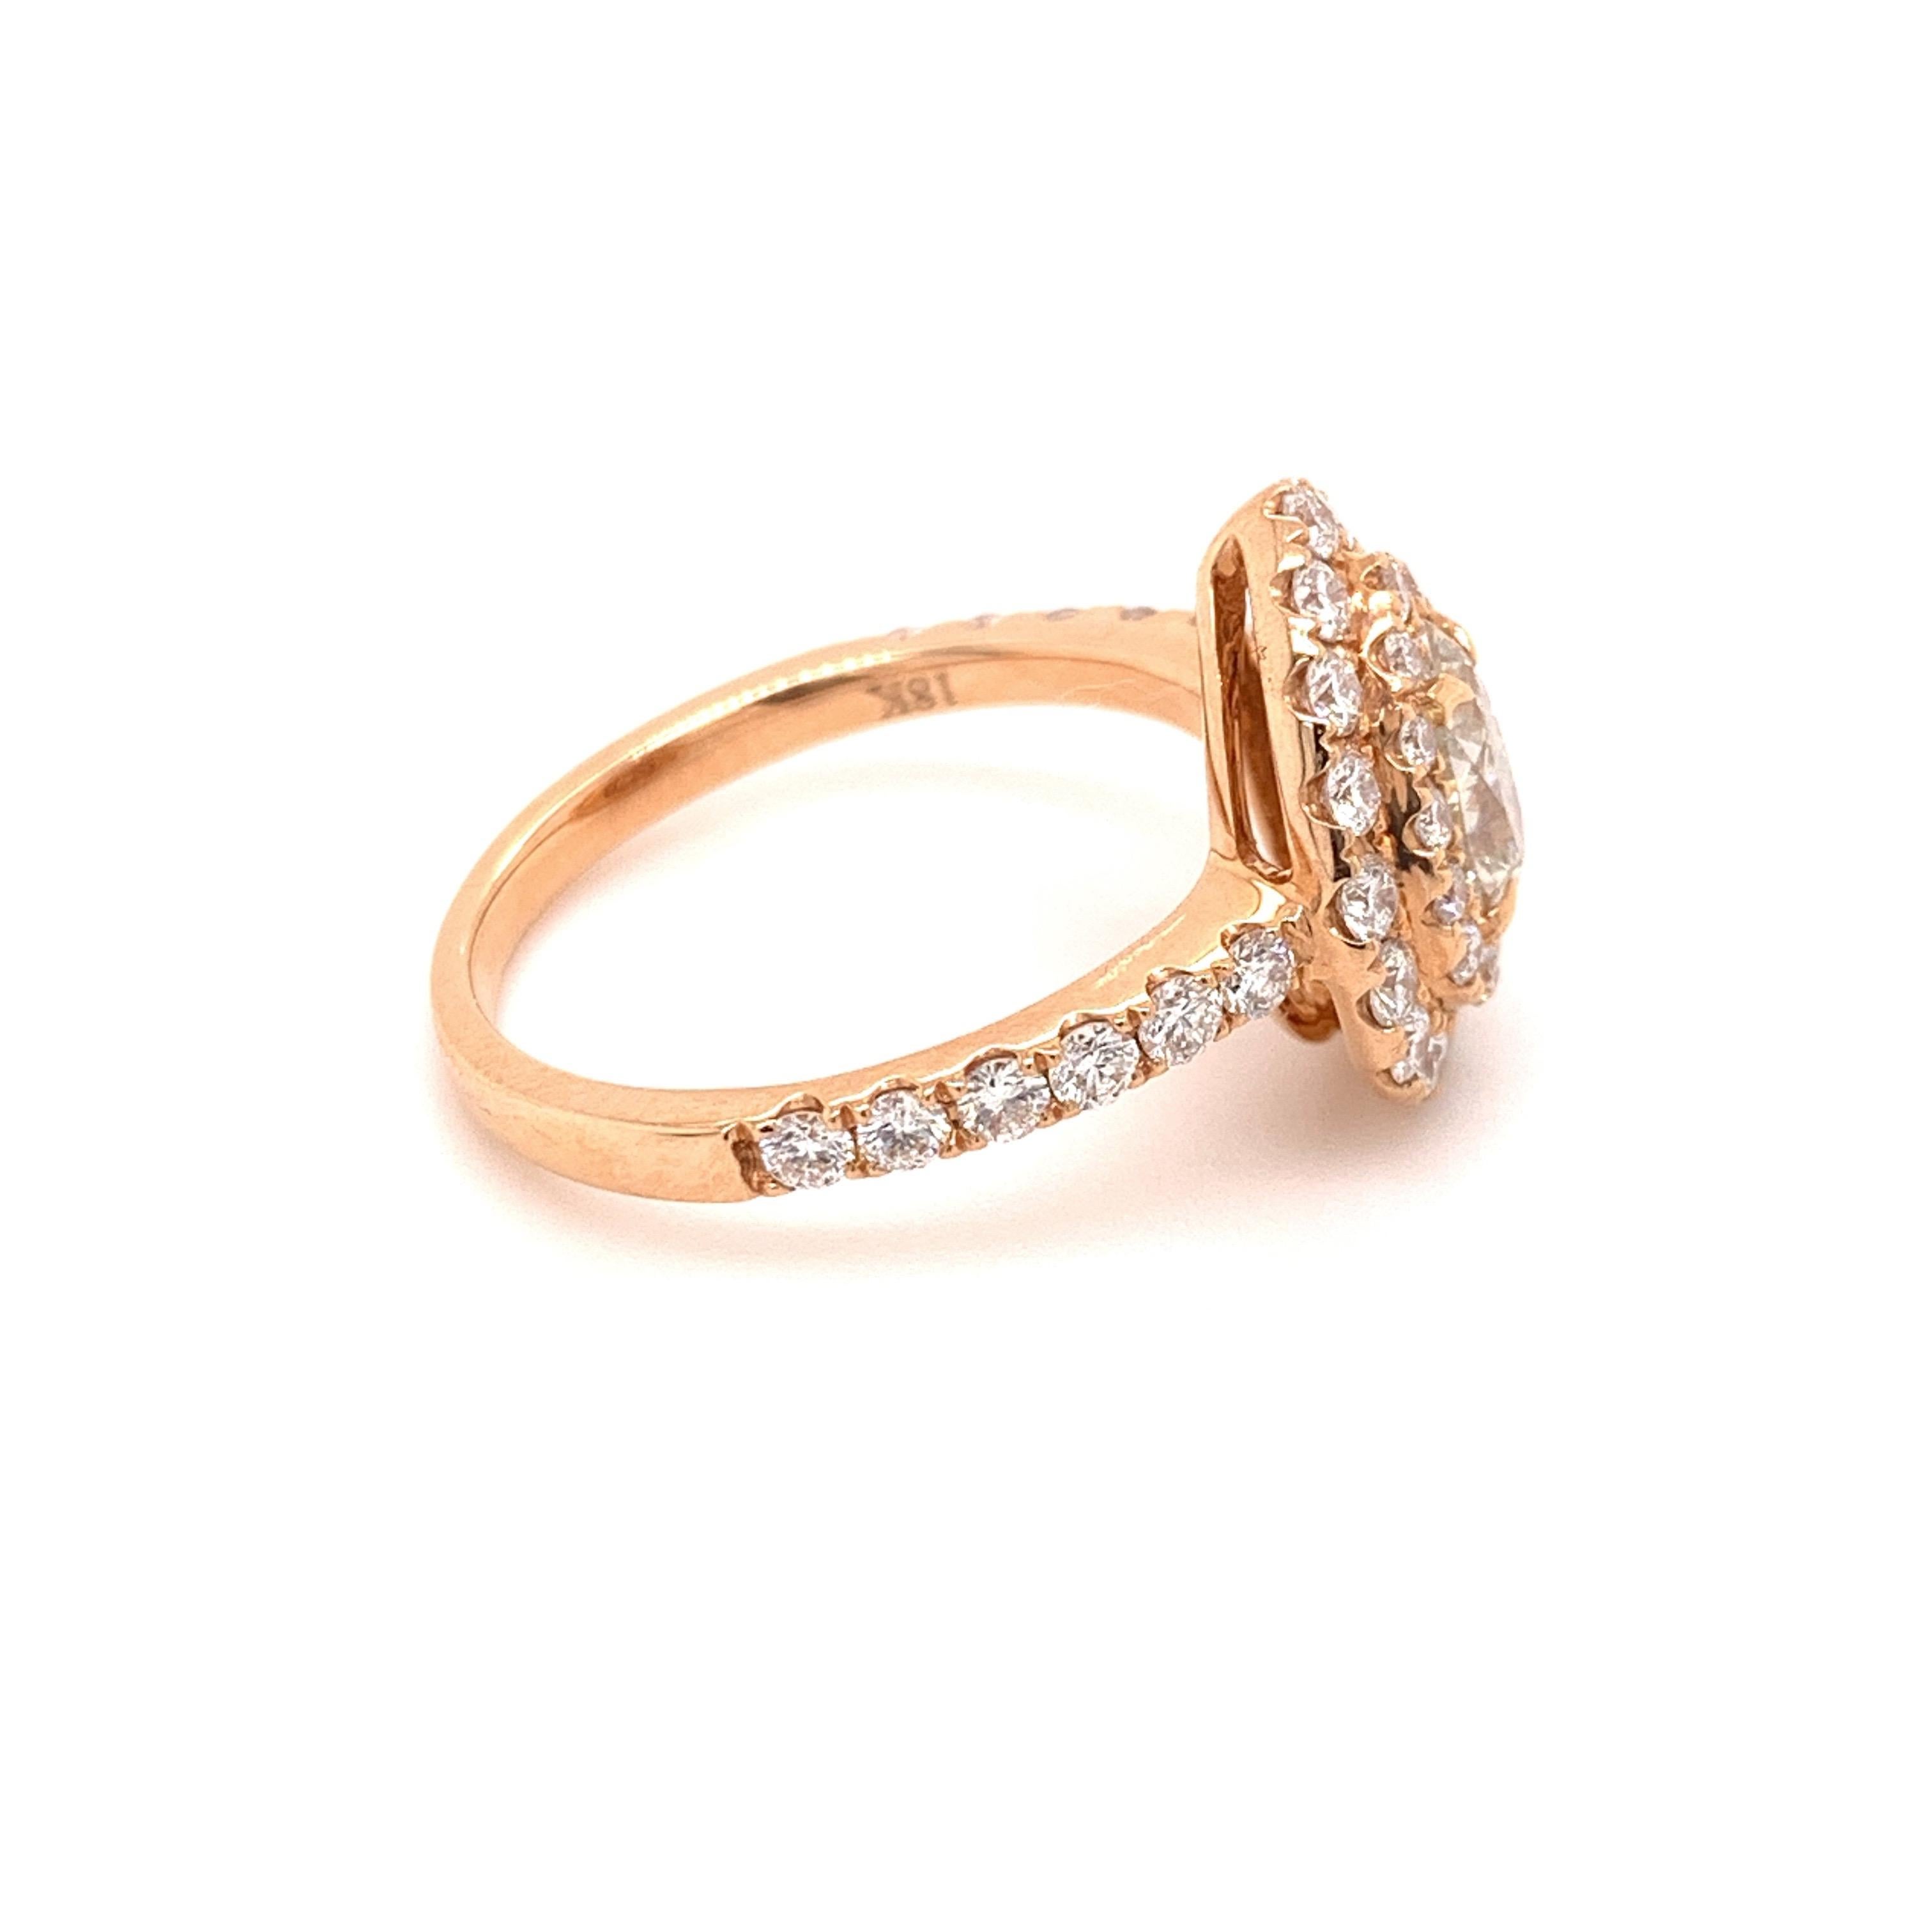 Classic diamond ring. Sparkling, pear brilliant cut, natural 0.51 carat center diamond encased with four knife prongs, accented with round brilliant cut diamonds on the shoulder and two rows framing the center diamond. Beautiful handcrafted design